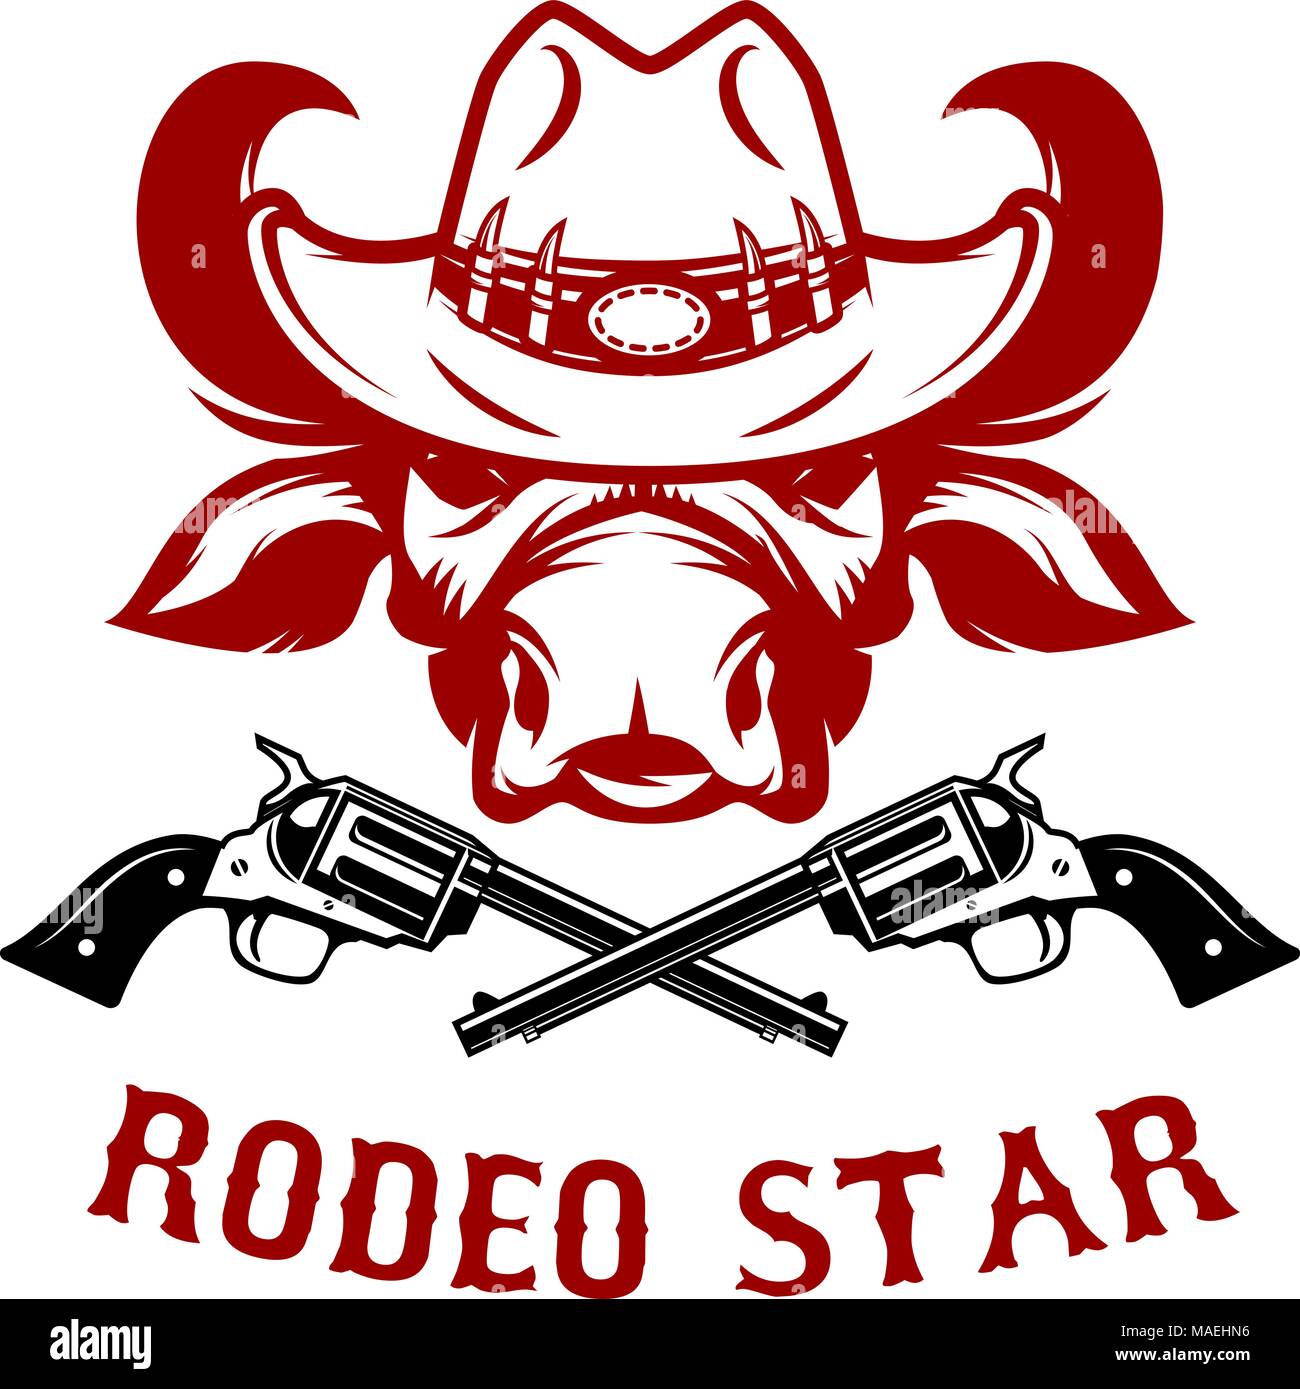 Rodeo star. Buffalo head in cowboy hat. Design element for poster, card, t shirt, emblem, sign. Vector illustration Stock Vector